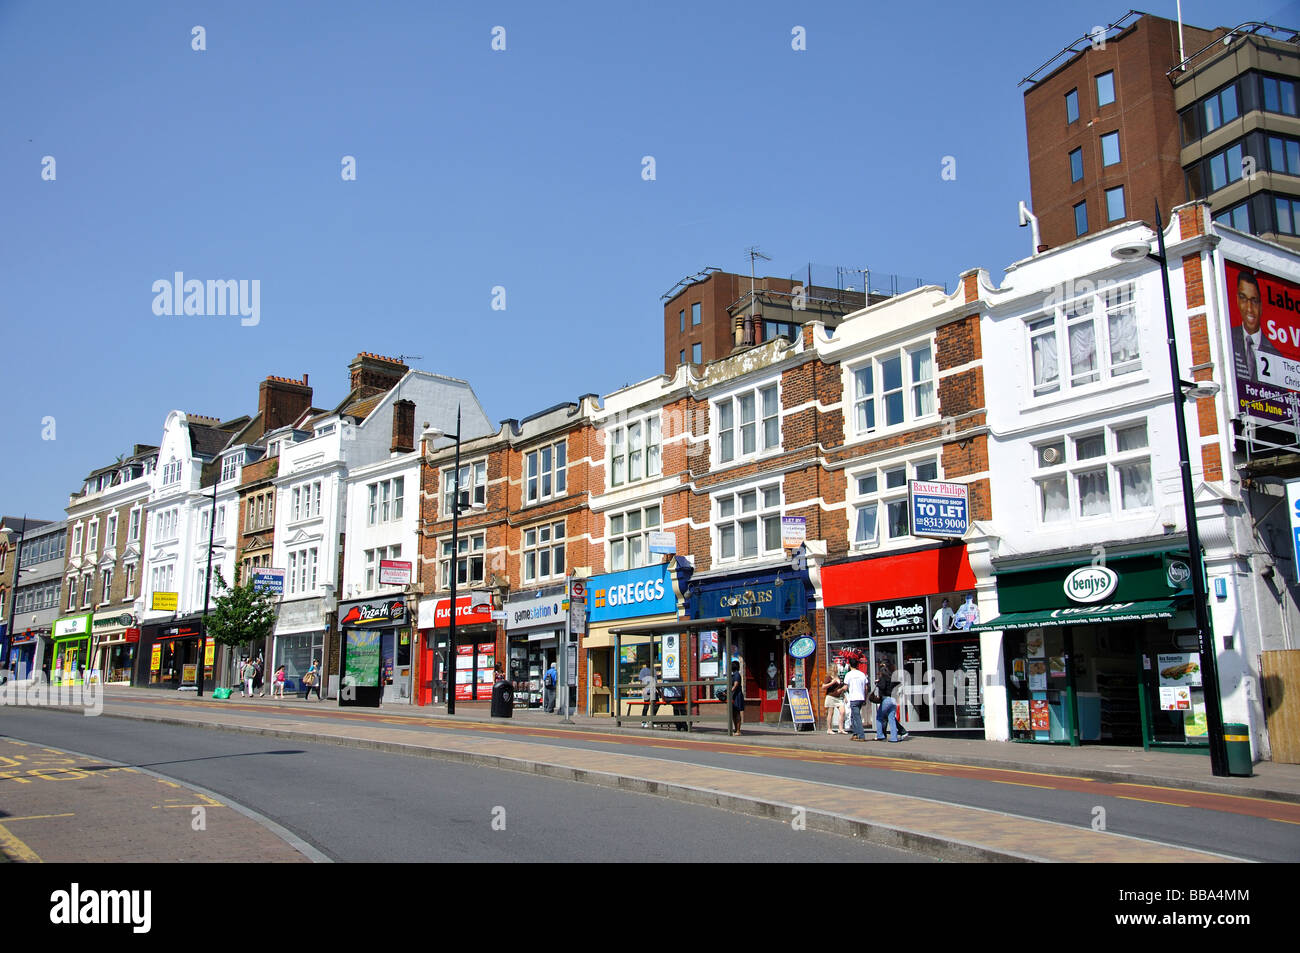 High Street, Bromley, Greater London, England, Regno Unito Foto Stock